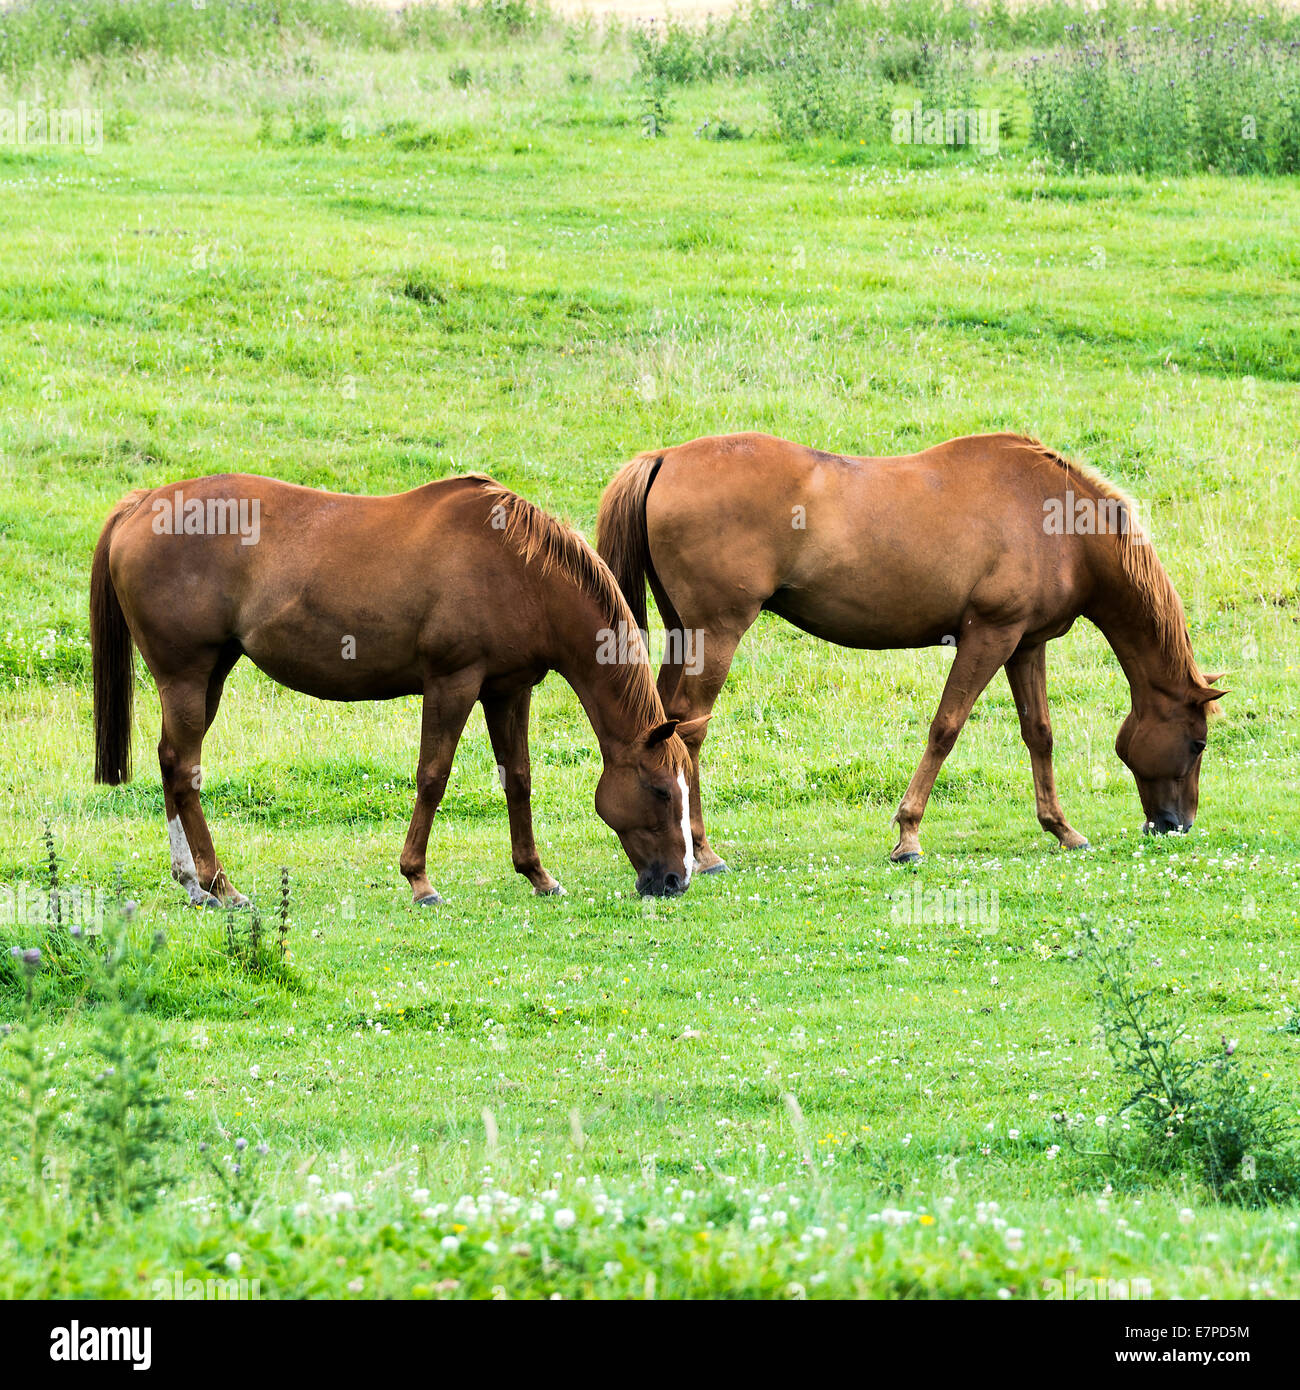 Two Lovely Chestnut Horses Grazing in Unison in a Grassy Field in Corbridge Northumberland England United Kingdom UK Stock Photo